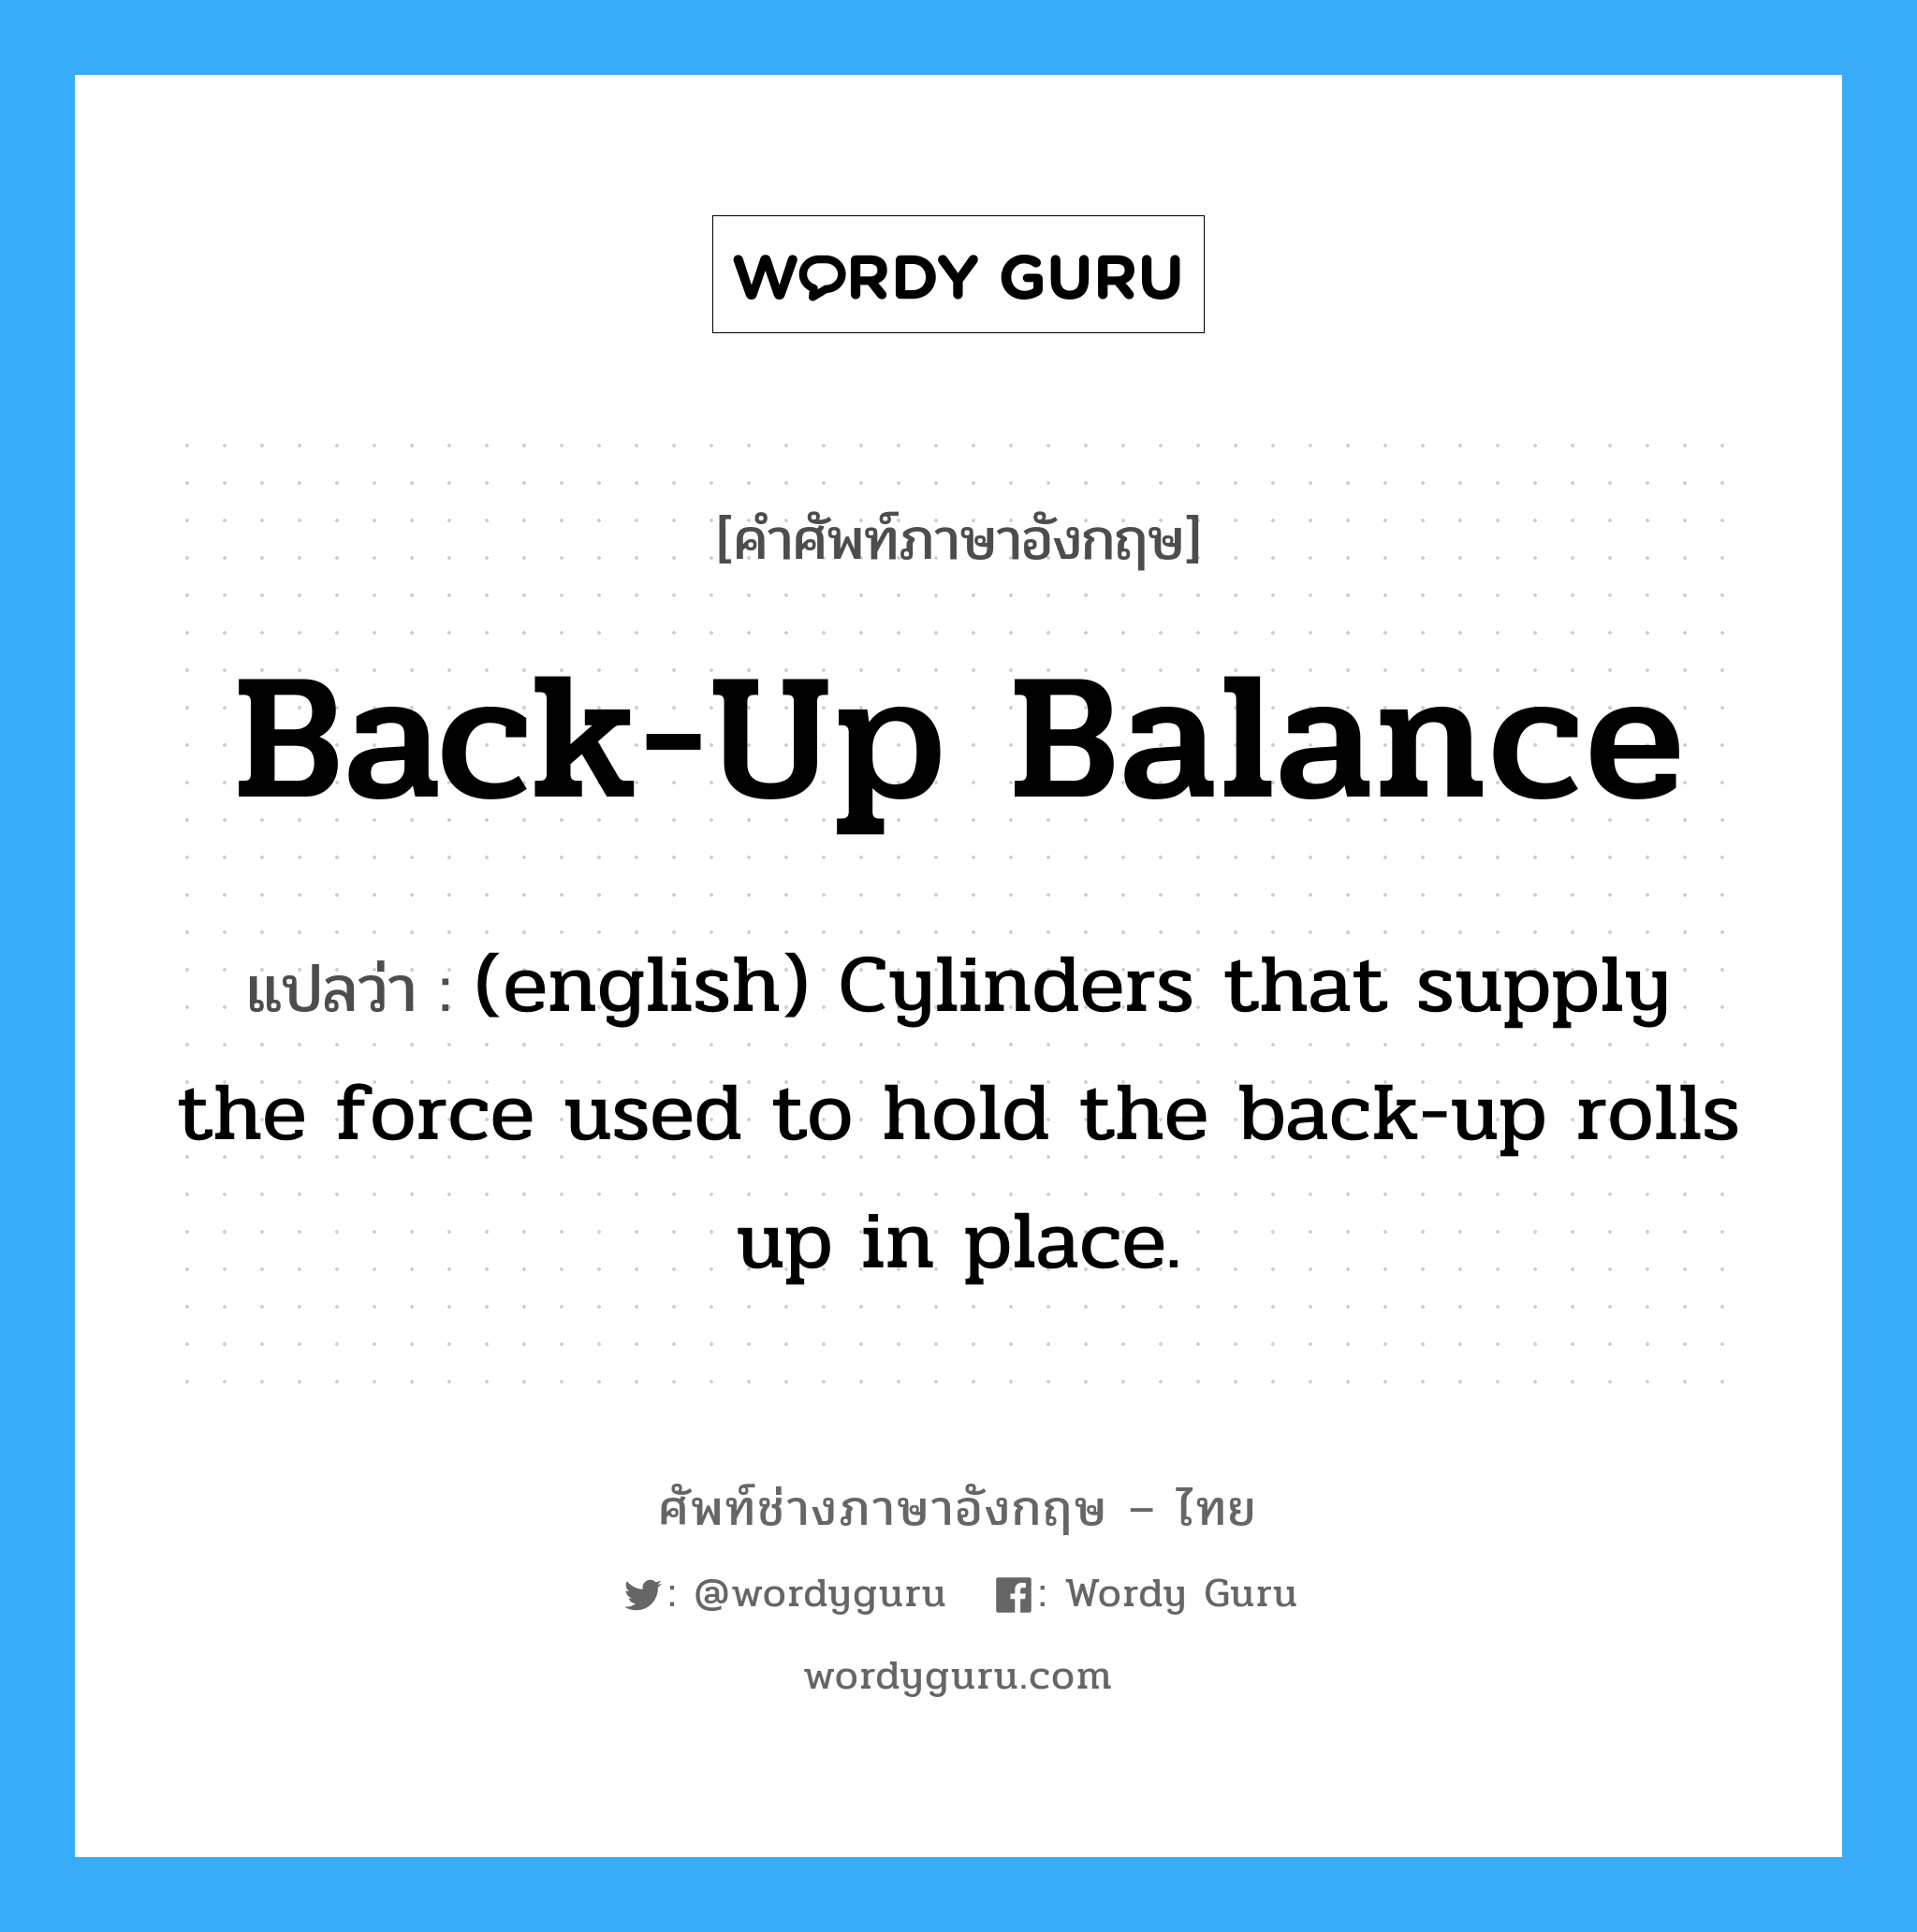 Back-up Balance แปลว่า?, คำศัพท์ช่างภาษาอังกฤษ - ไทย Back-up Balance คำศัพท์ภาษาอังกฤษ Back-up Balance แปลว่า (english) Cylinders that supply the force used to hold the back-up rolls up in place.